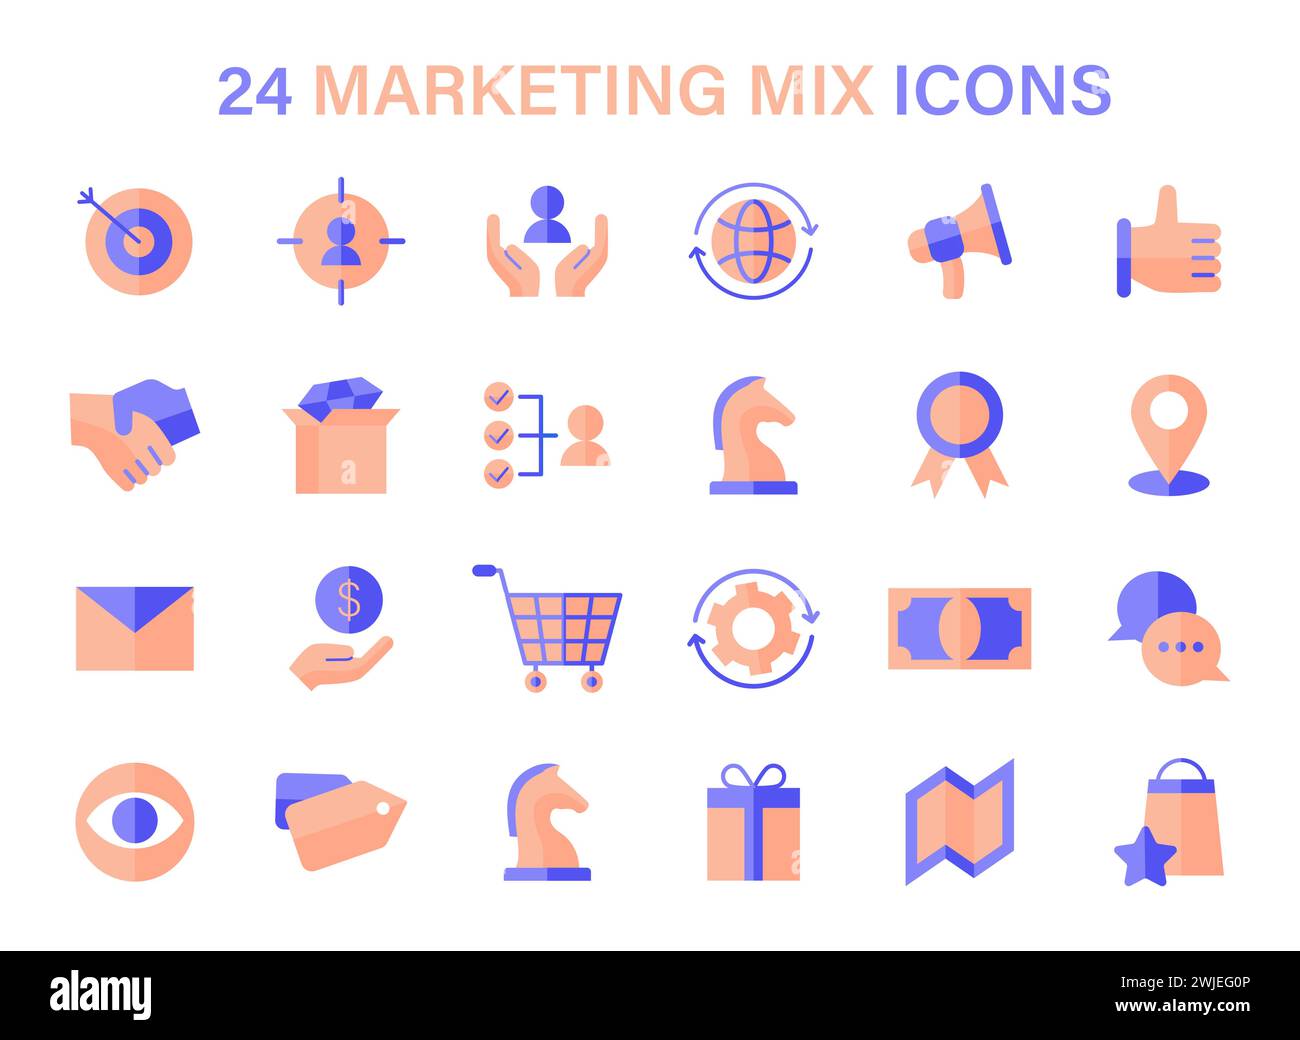 Marketing Mix icon set. Symbols represent strategic components like targeting, global reach, and customer service. Essentials for market planning. Flat vector icons. Stock Vector